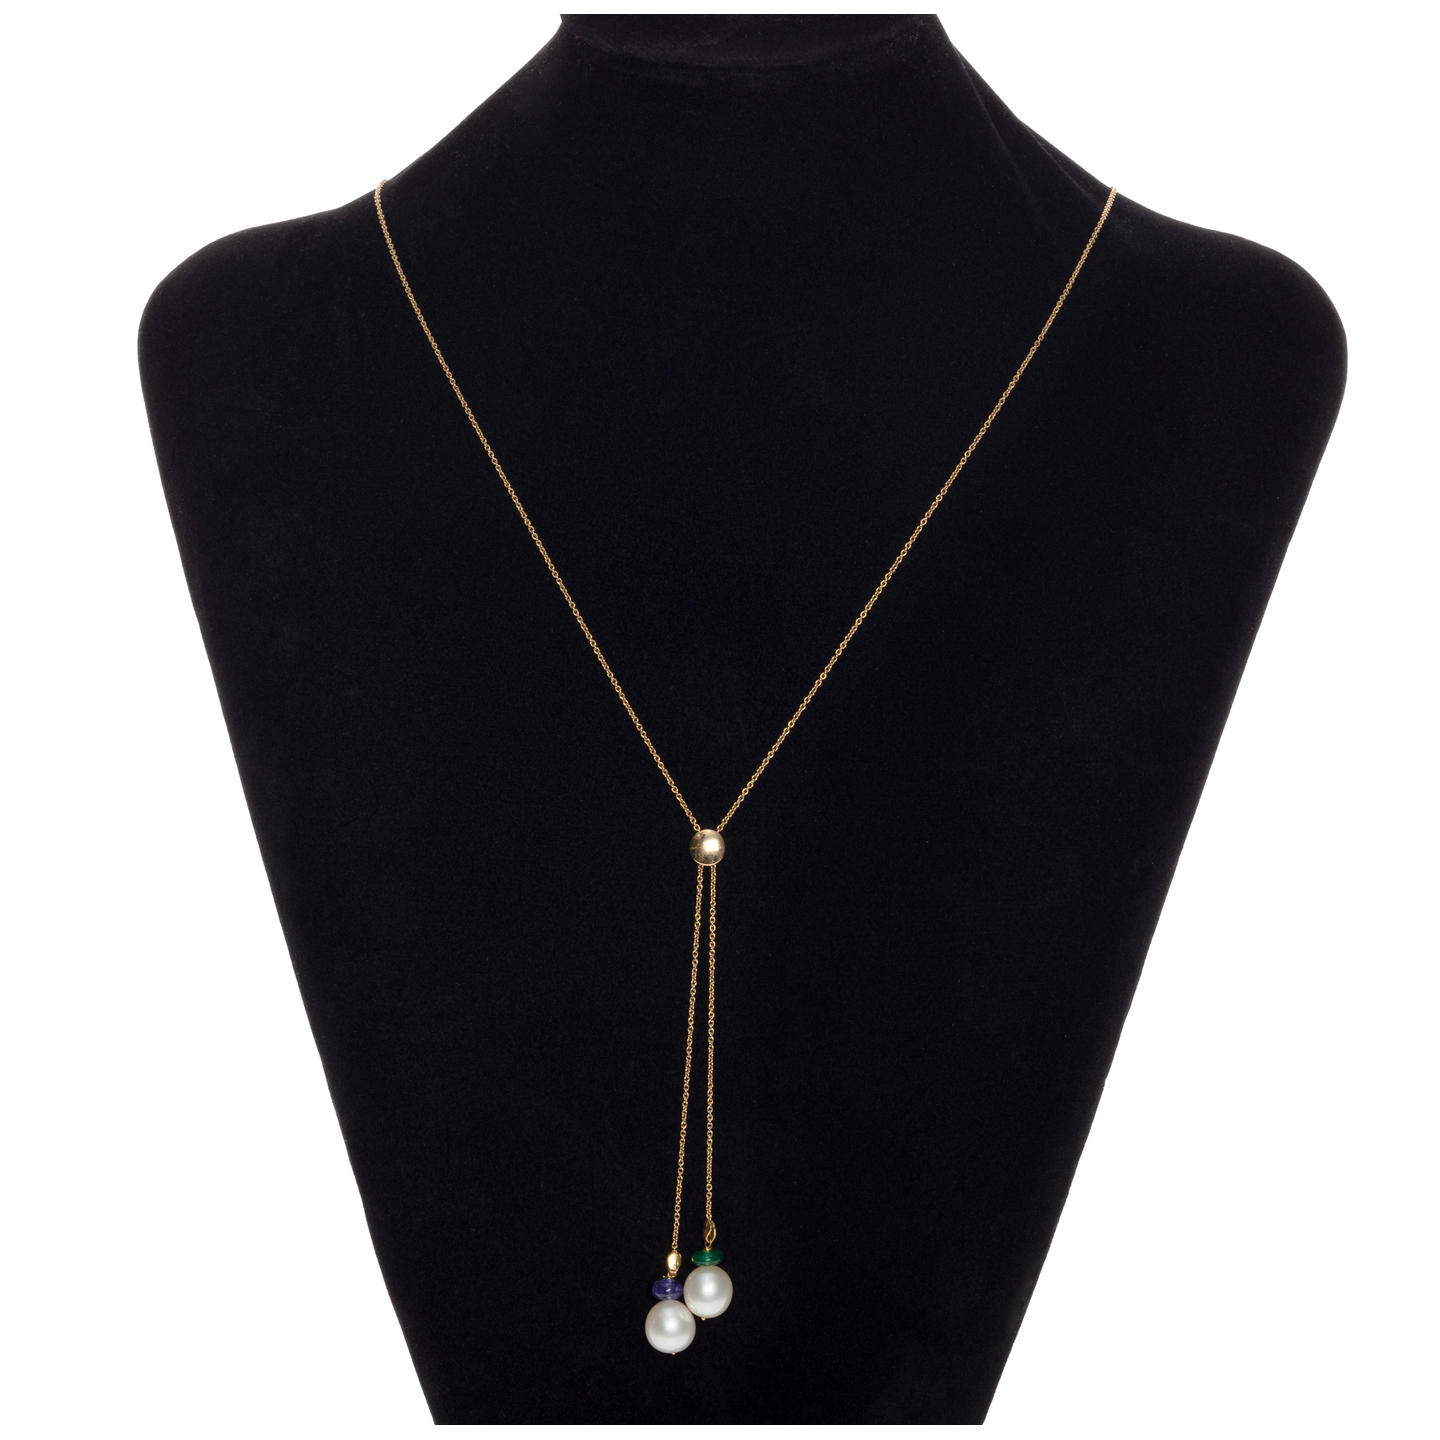 CHNC2201 - Lariat Necklace With Drops